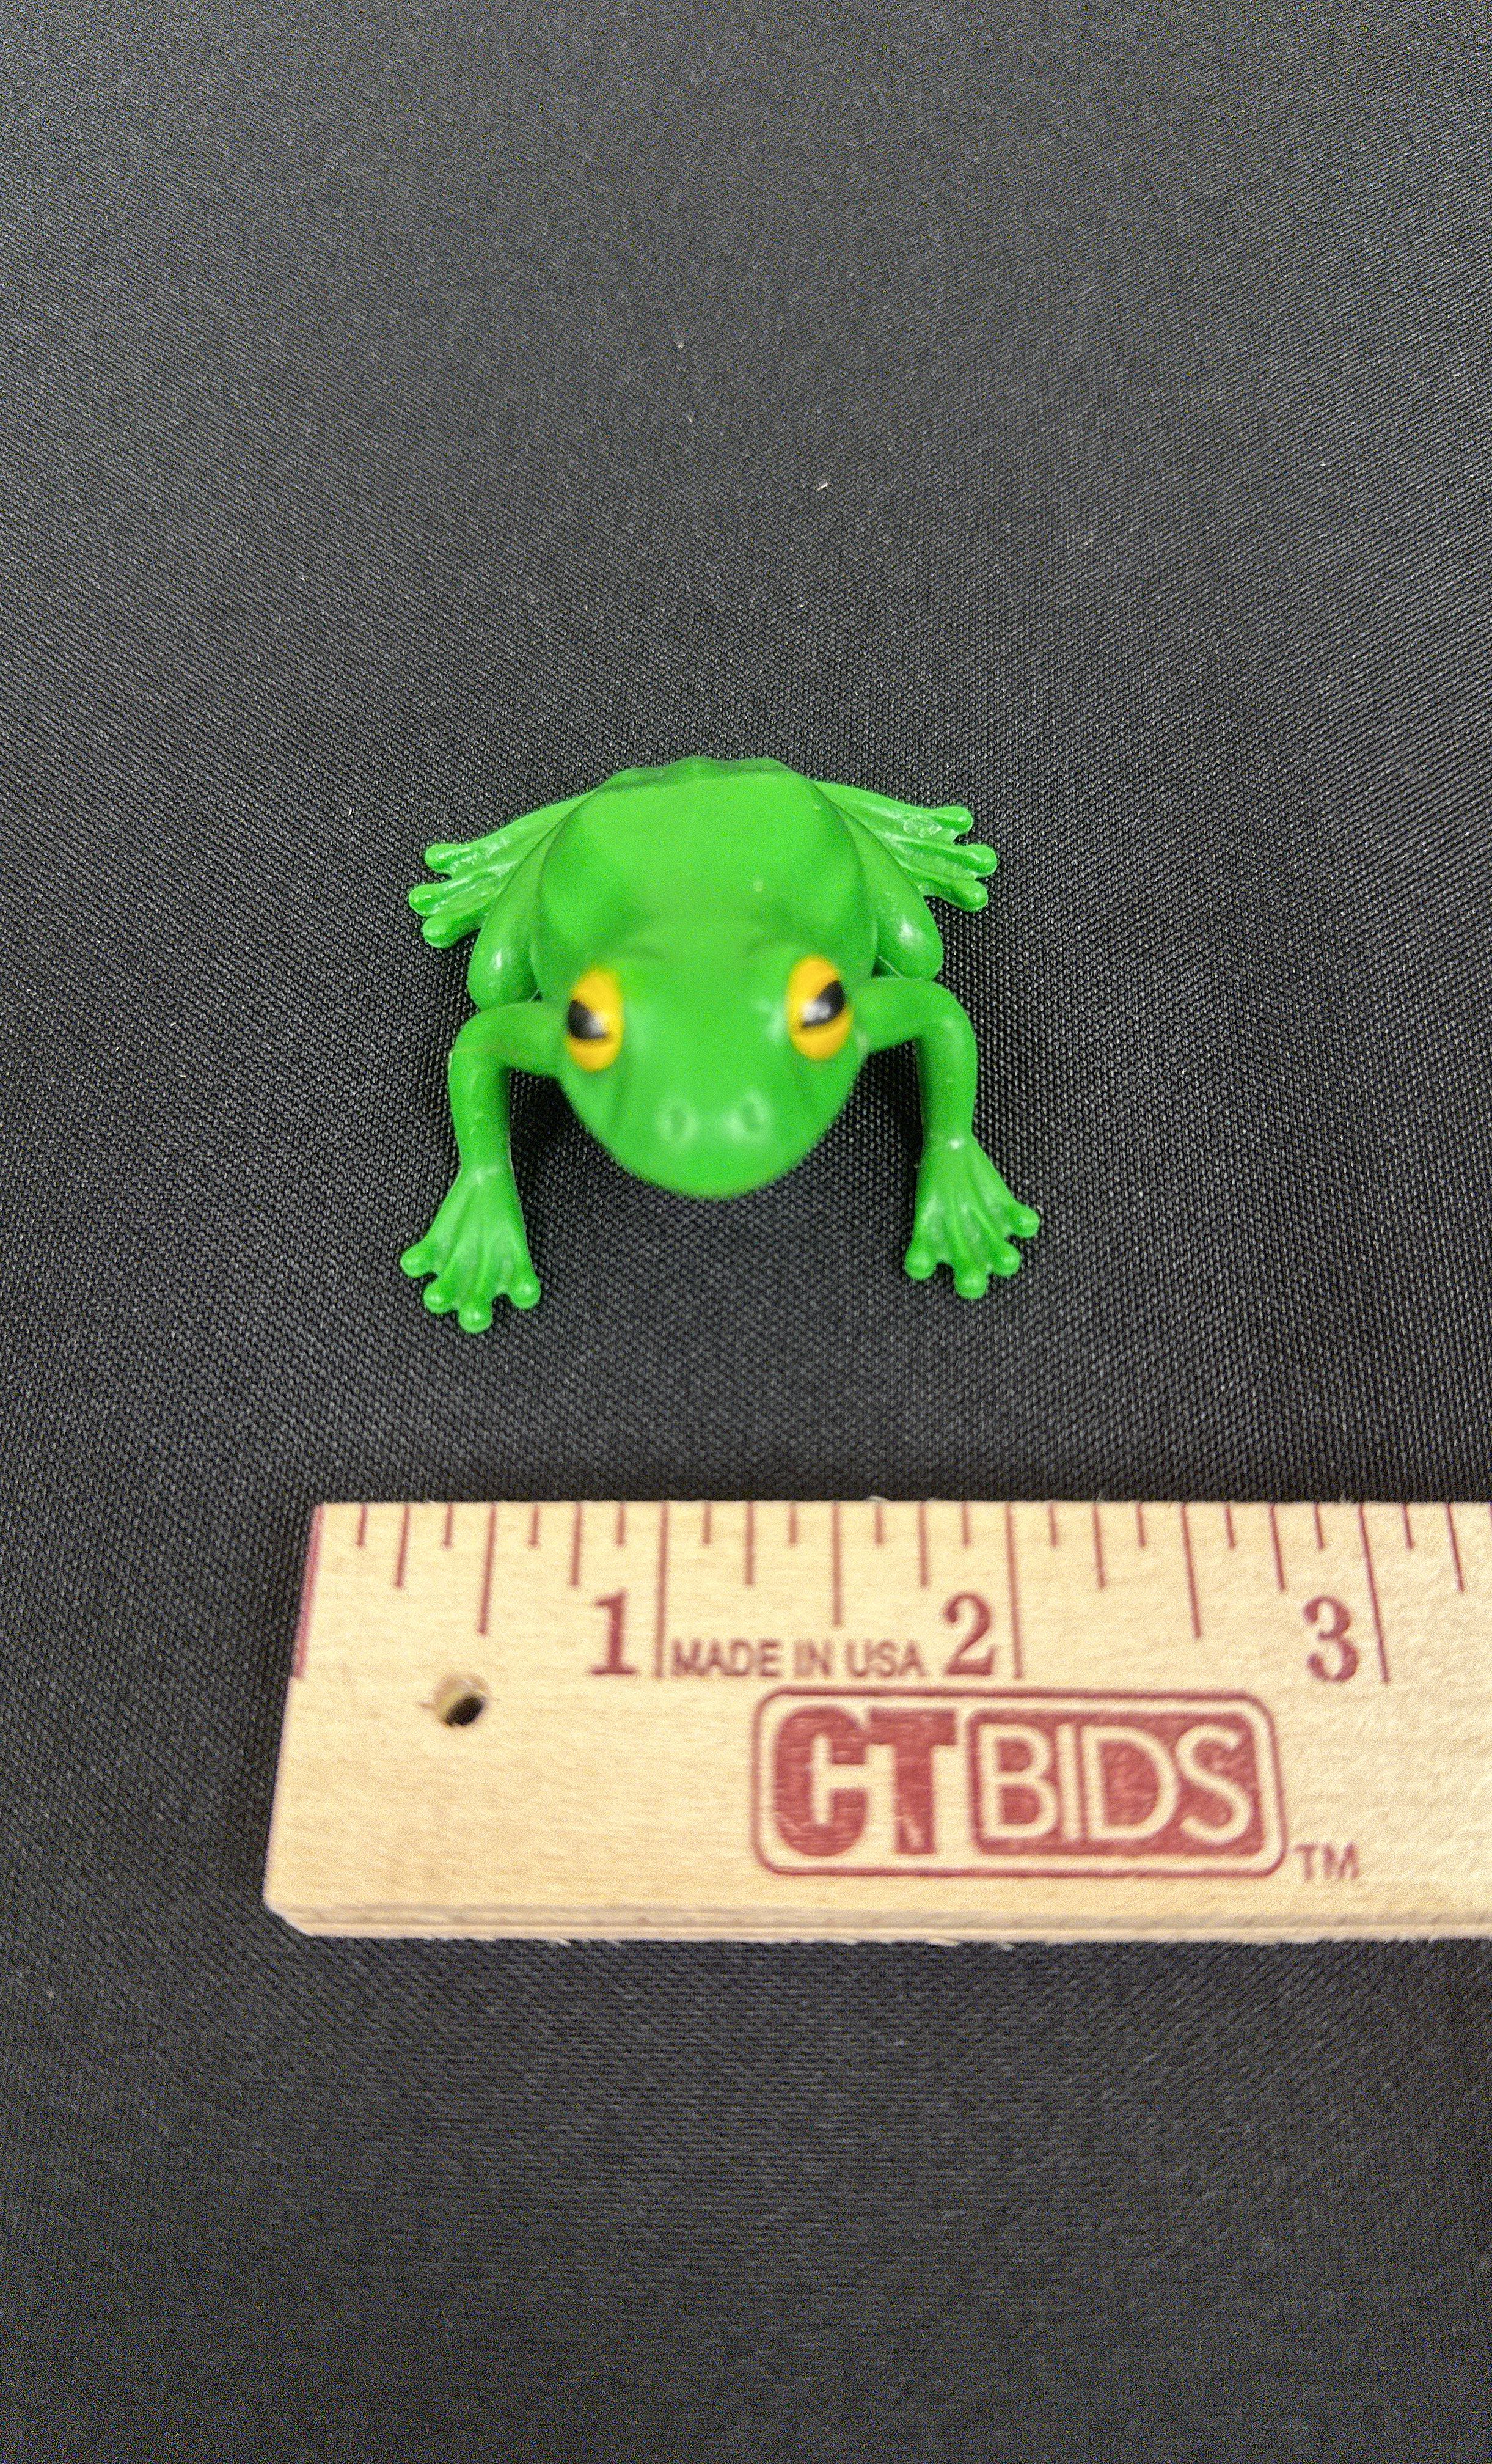 Green PVC Vinyl Frog Toy - China Frog Toy and Rubber Frog Toy